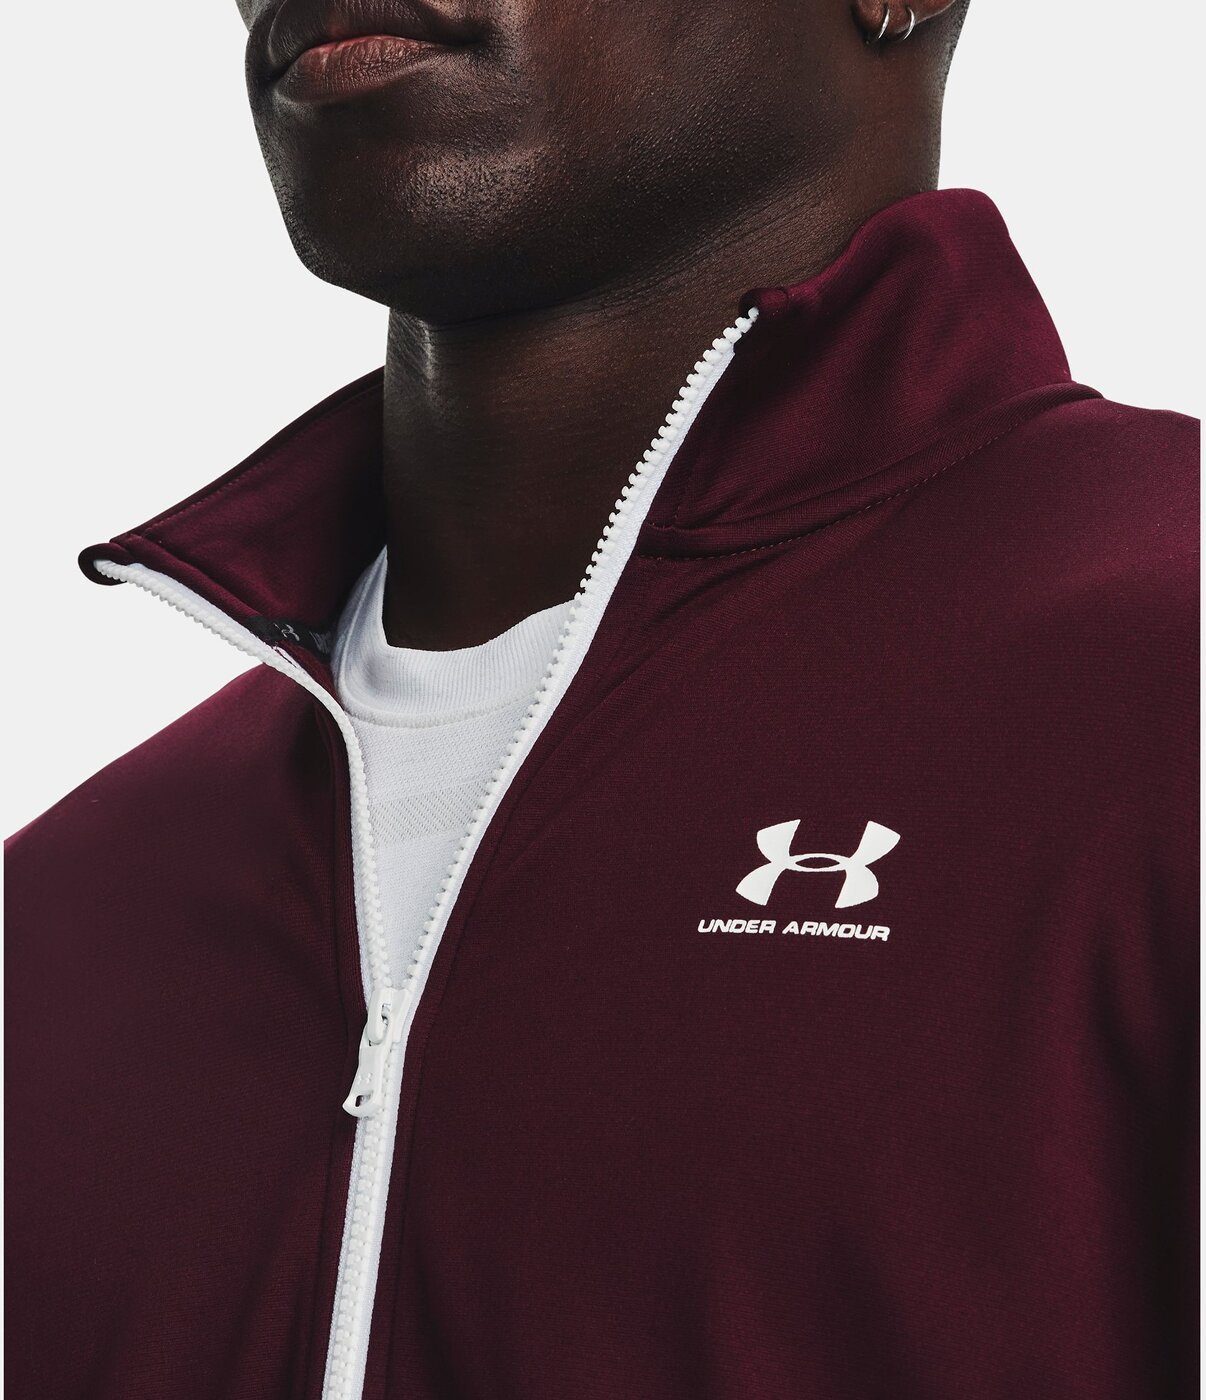 Under Armour® T-Shirt Bordeaux Rot JACKET SPORTSTYLE TRICOT DARK MAROON